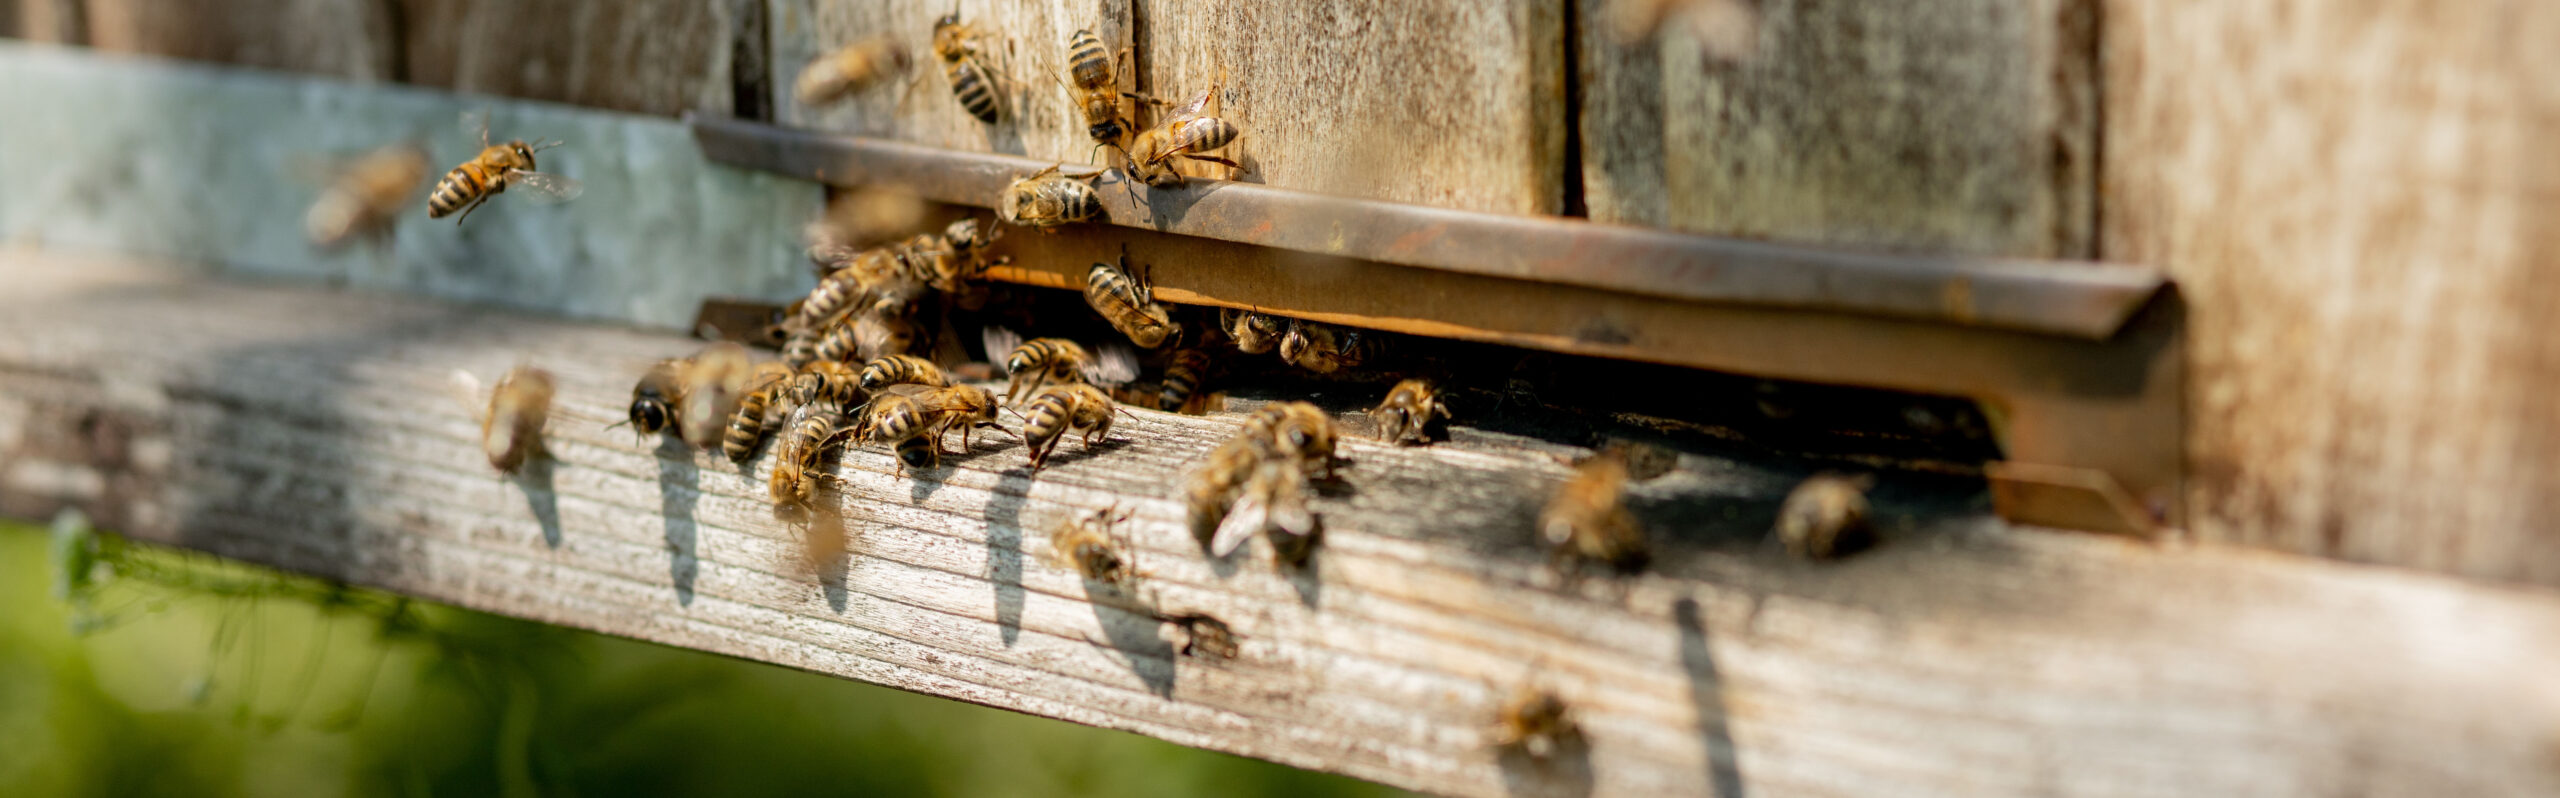 The Sweet Science: How Do Bees Make Honey?